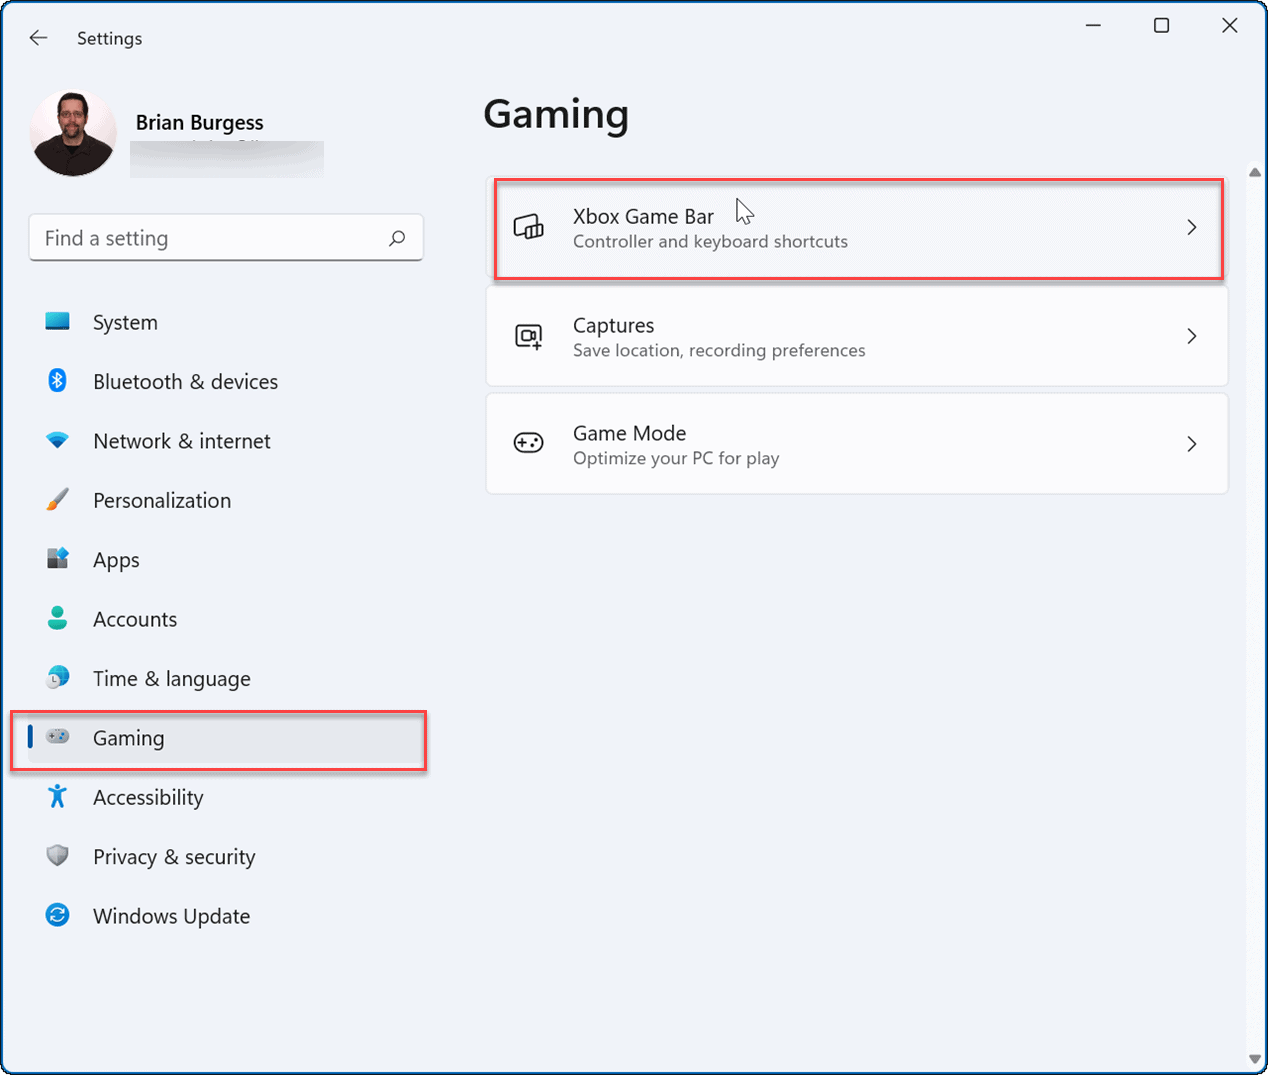 How to Screen Record With Xbox Game Bar?